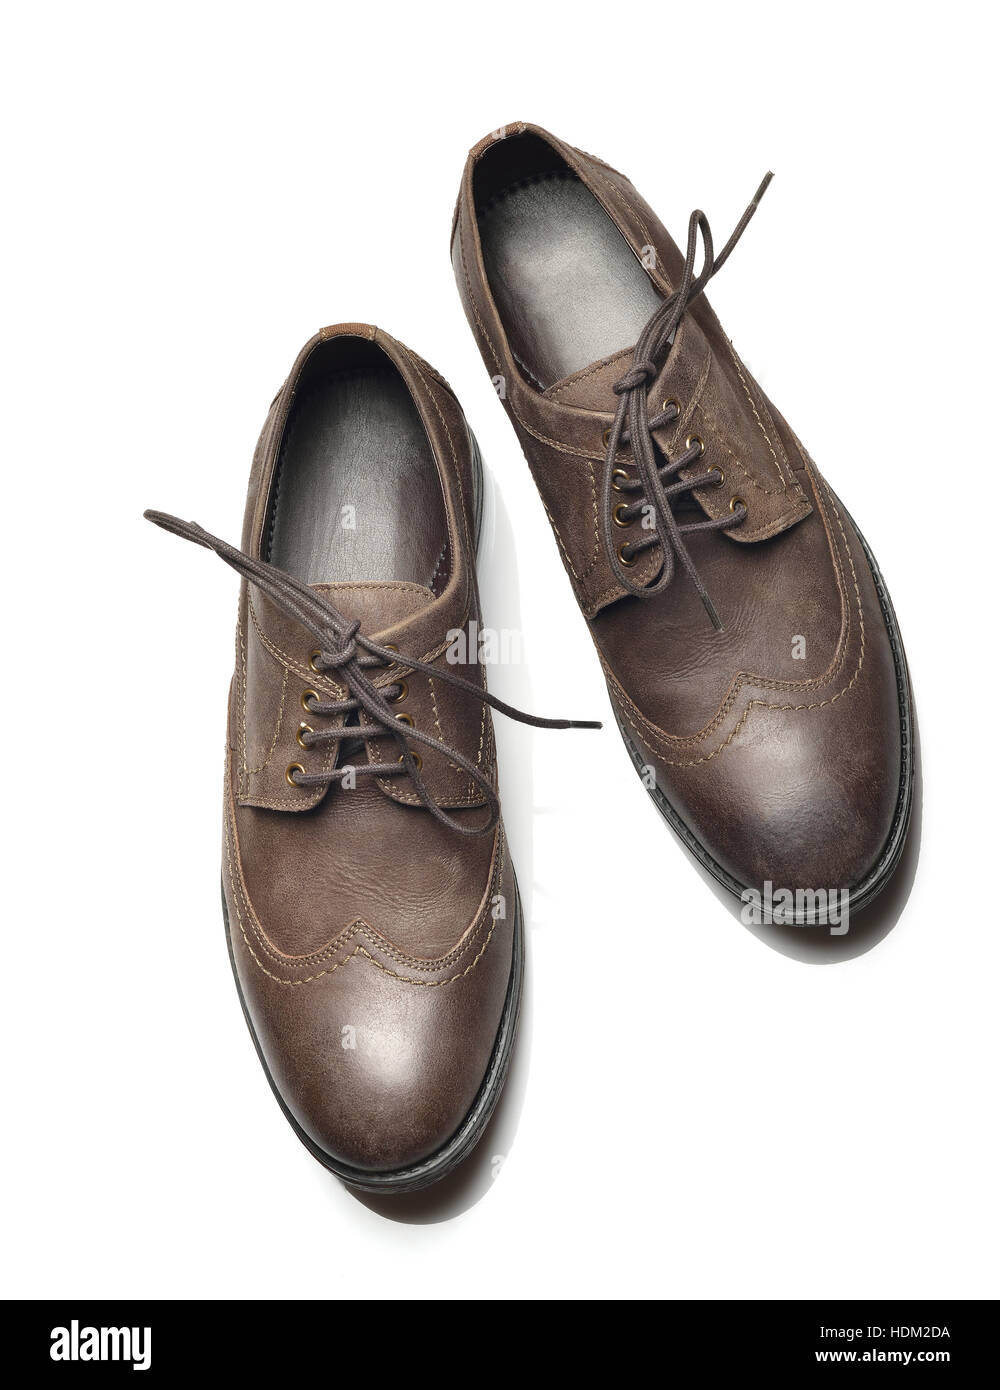 Top View of Men's Leather Shoes Stock Photo